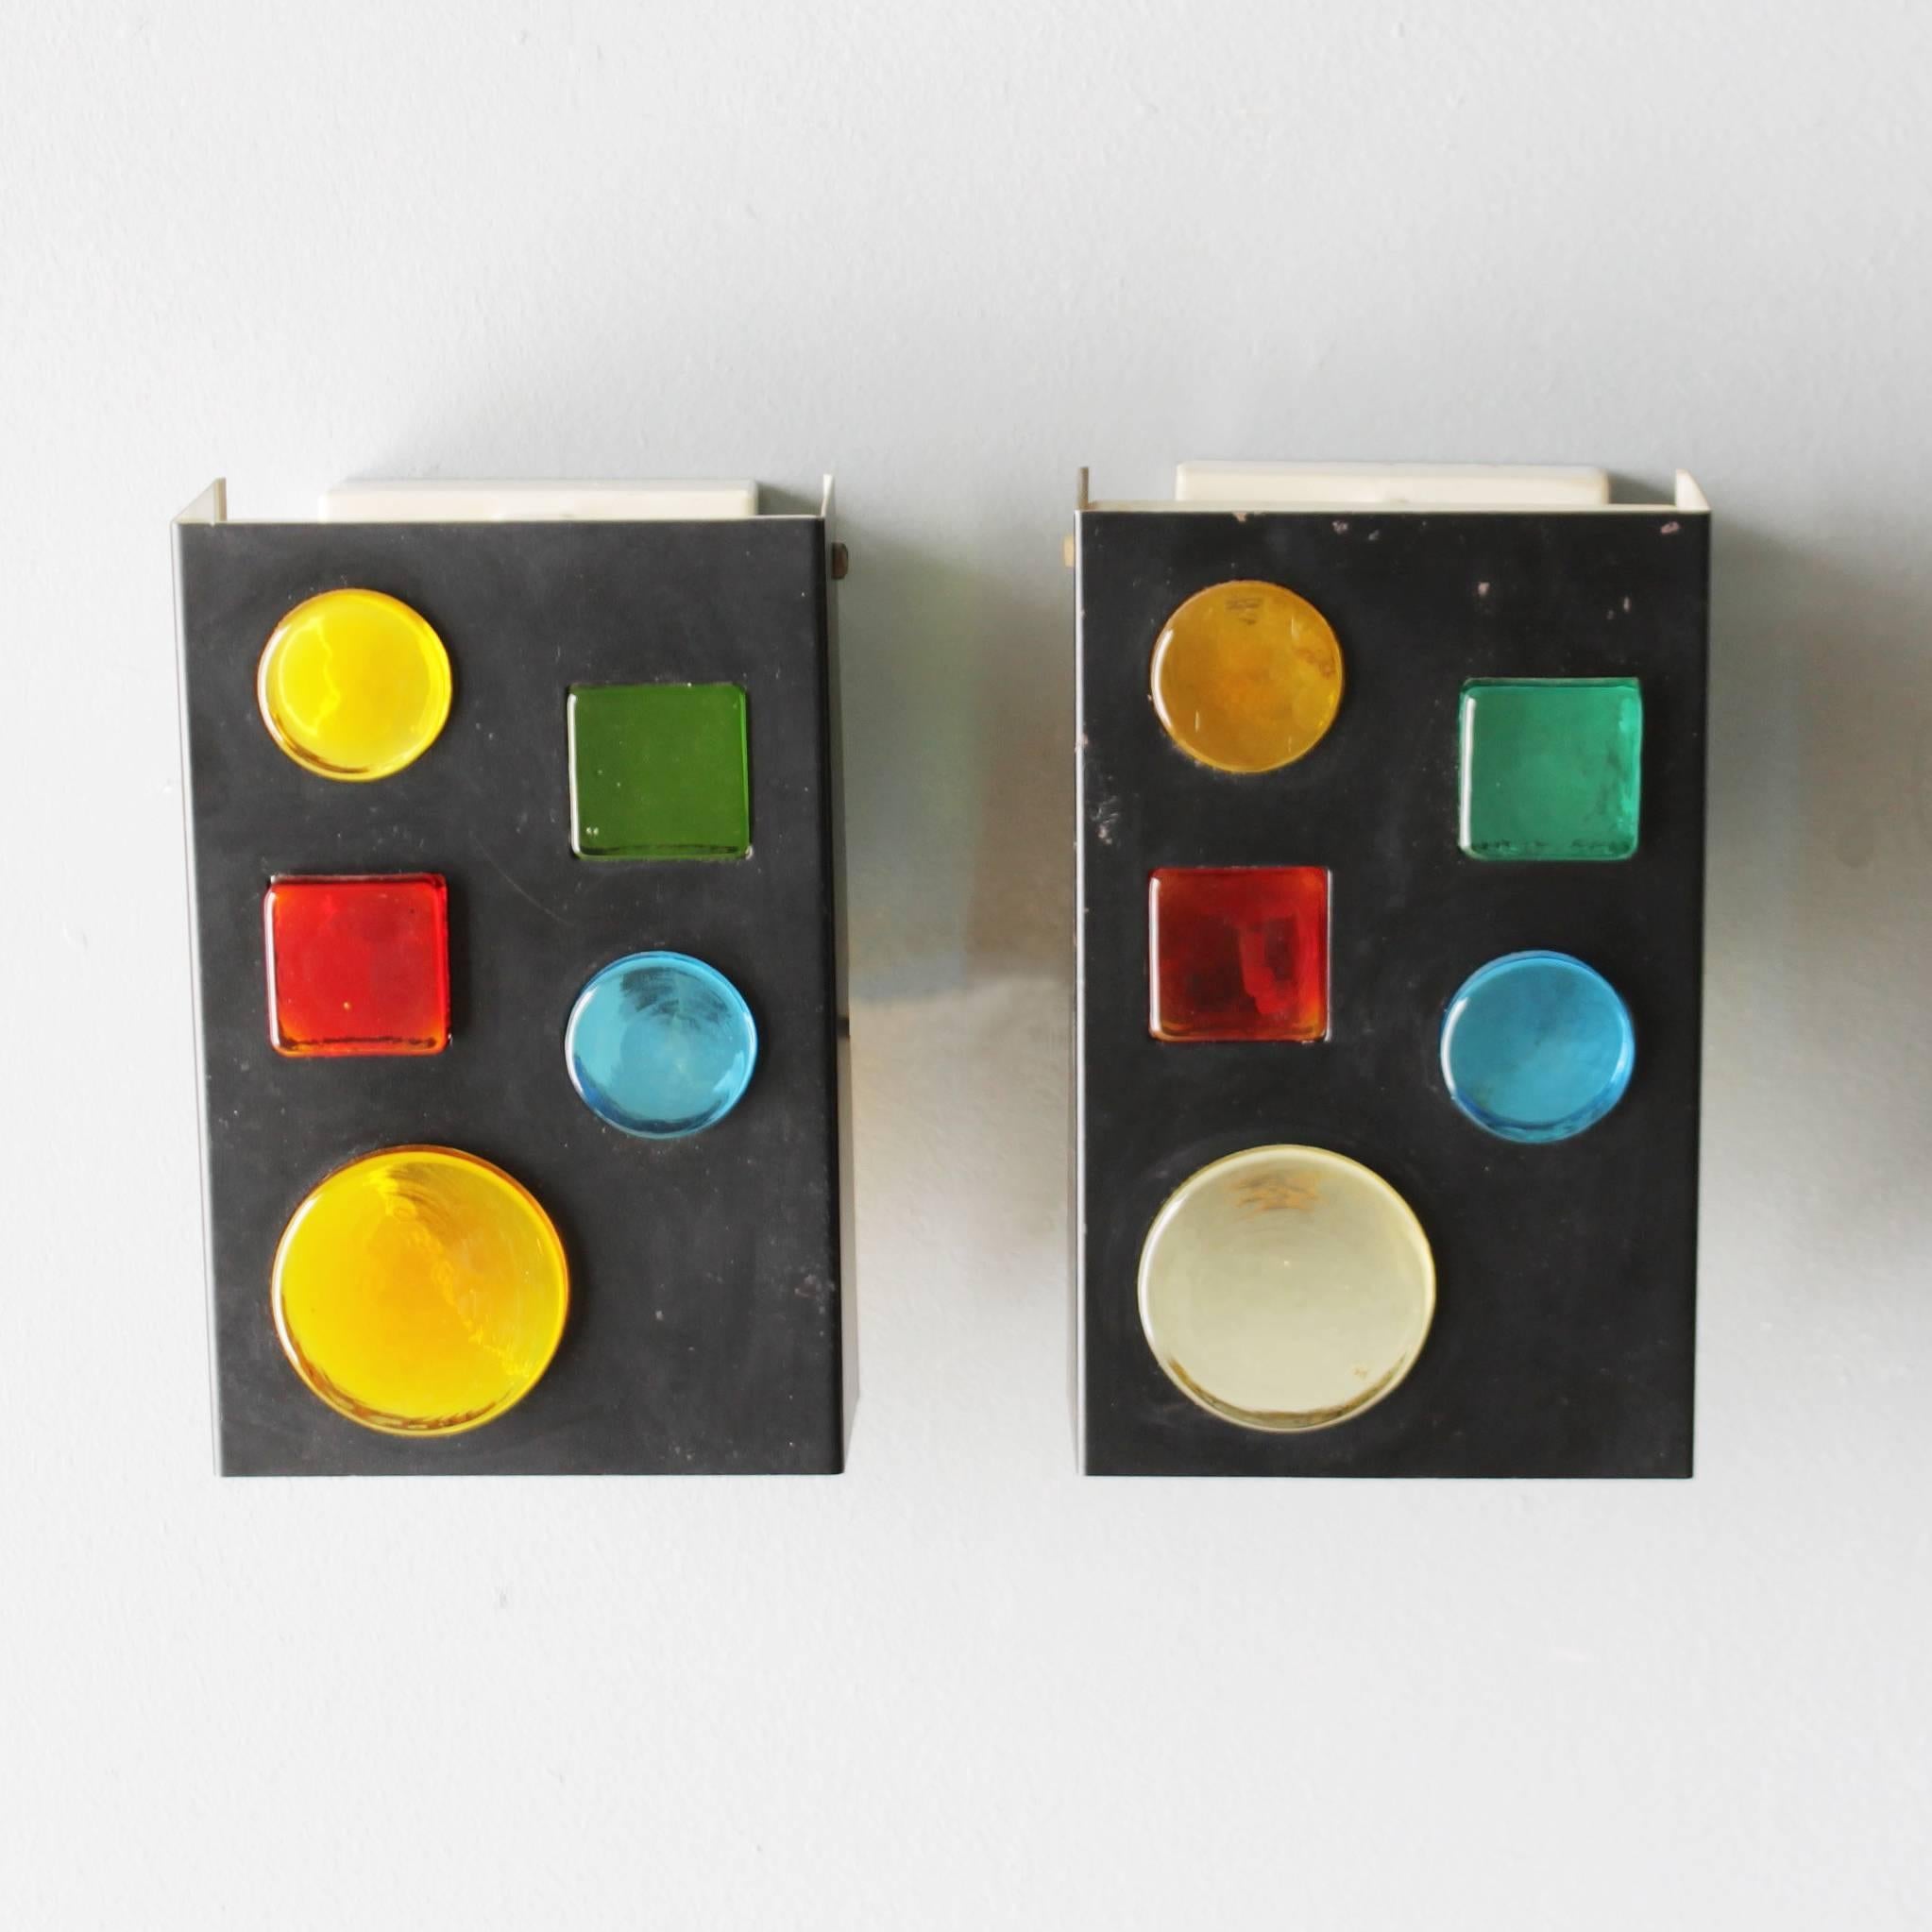 Pair of very rare geometric sconces by RAAK Amsterdam, the Netherlands. Colored glass geometric shapes in a black lacquered rectangular metal lamp. 
One bulb, 40 watt, E14 14-17 mm Small Edison Screw (SES).
Dimensions: Height 7.9 in. (20 cm),